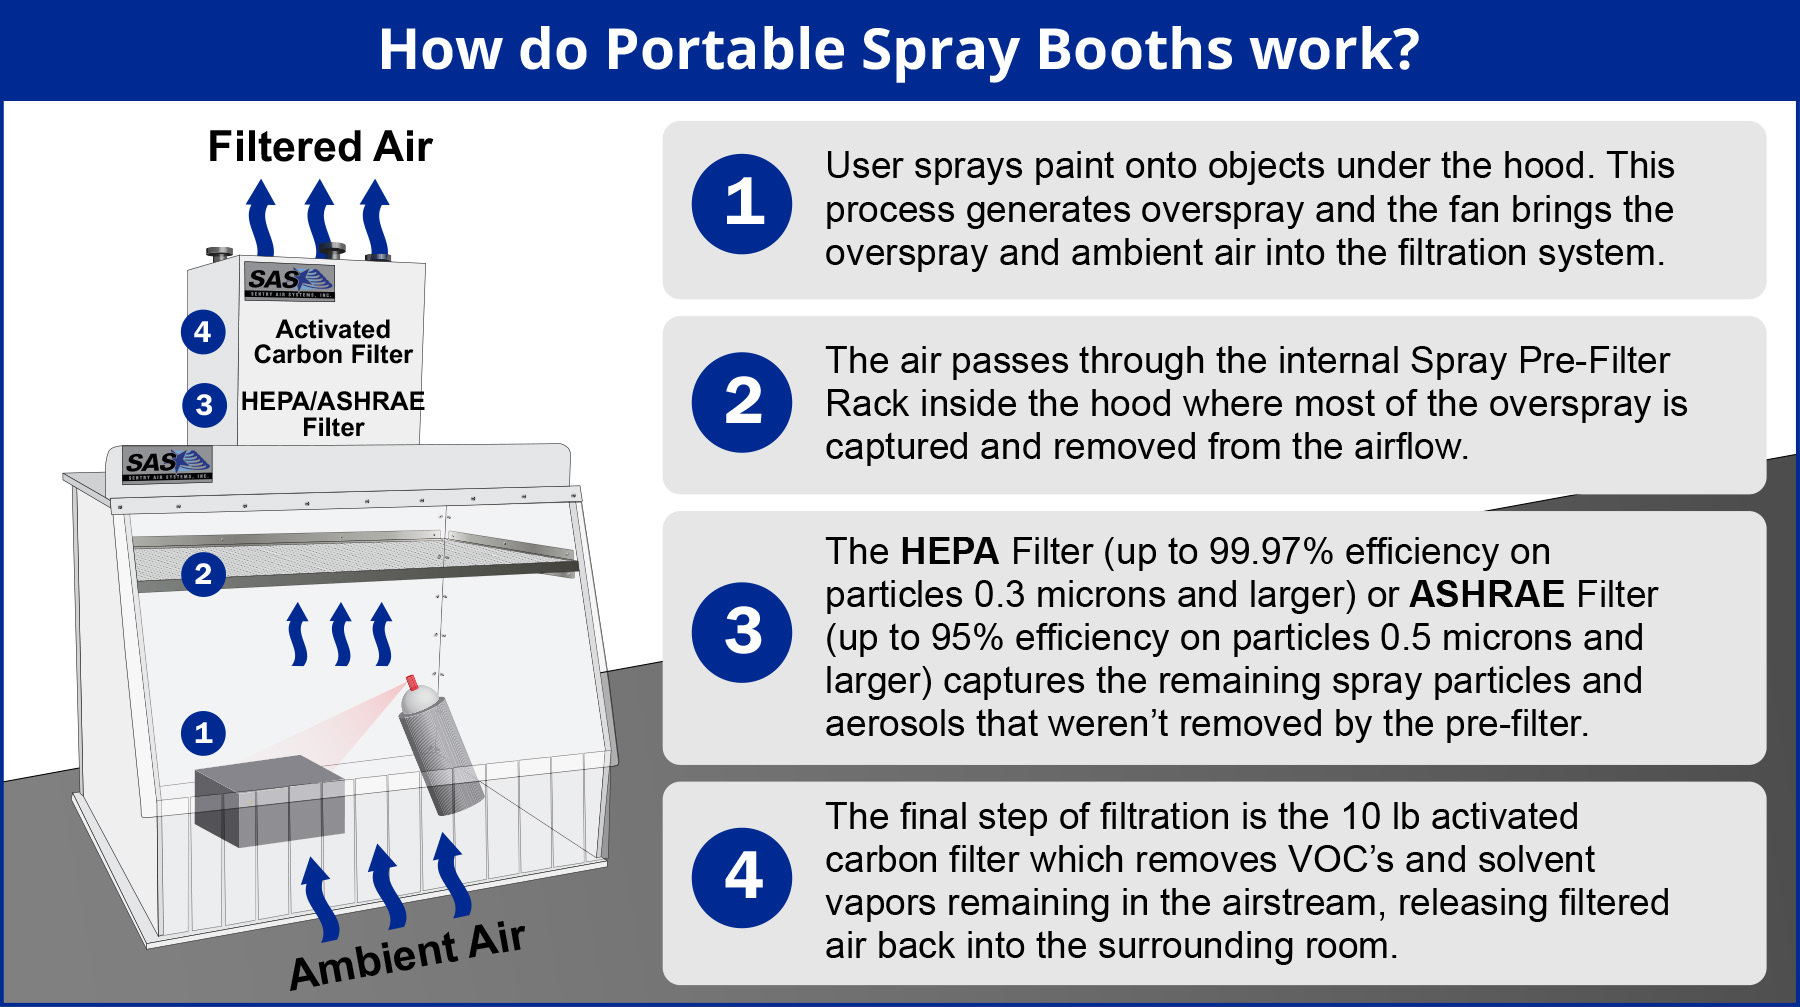 Portable Airbrush booth with filter